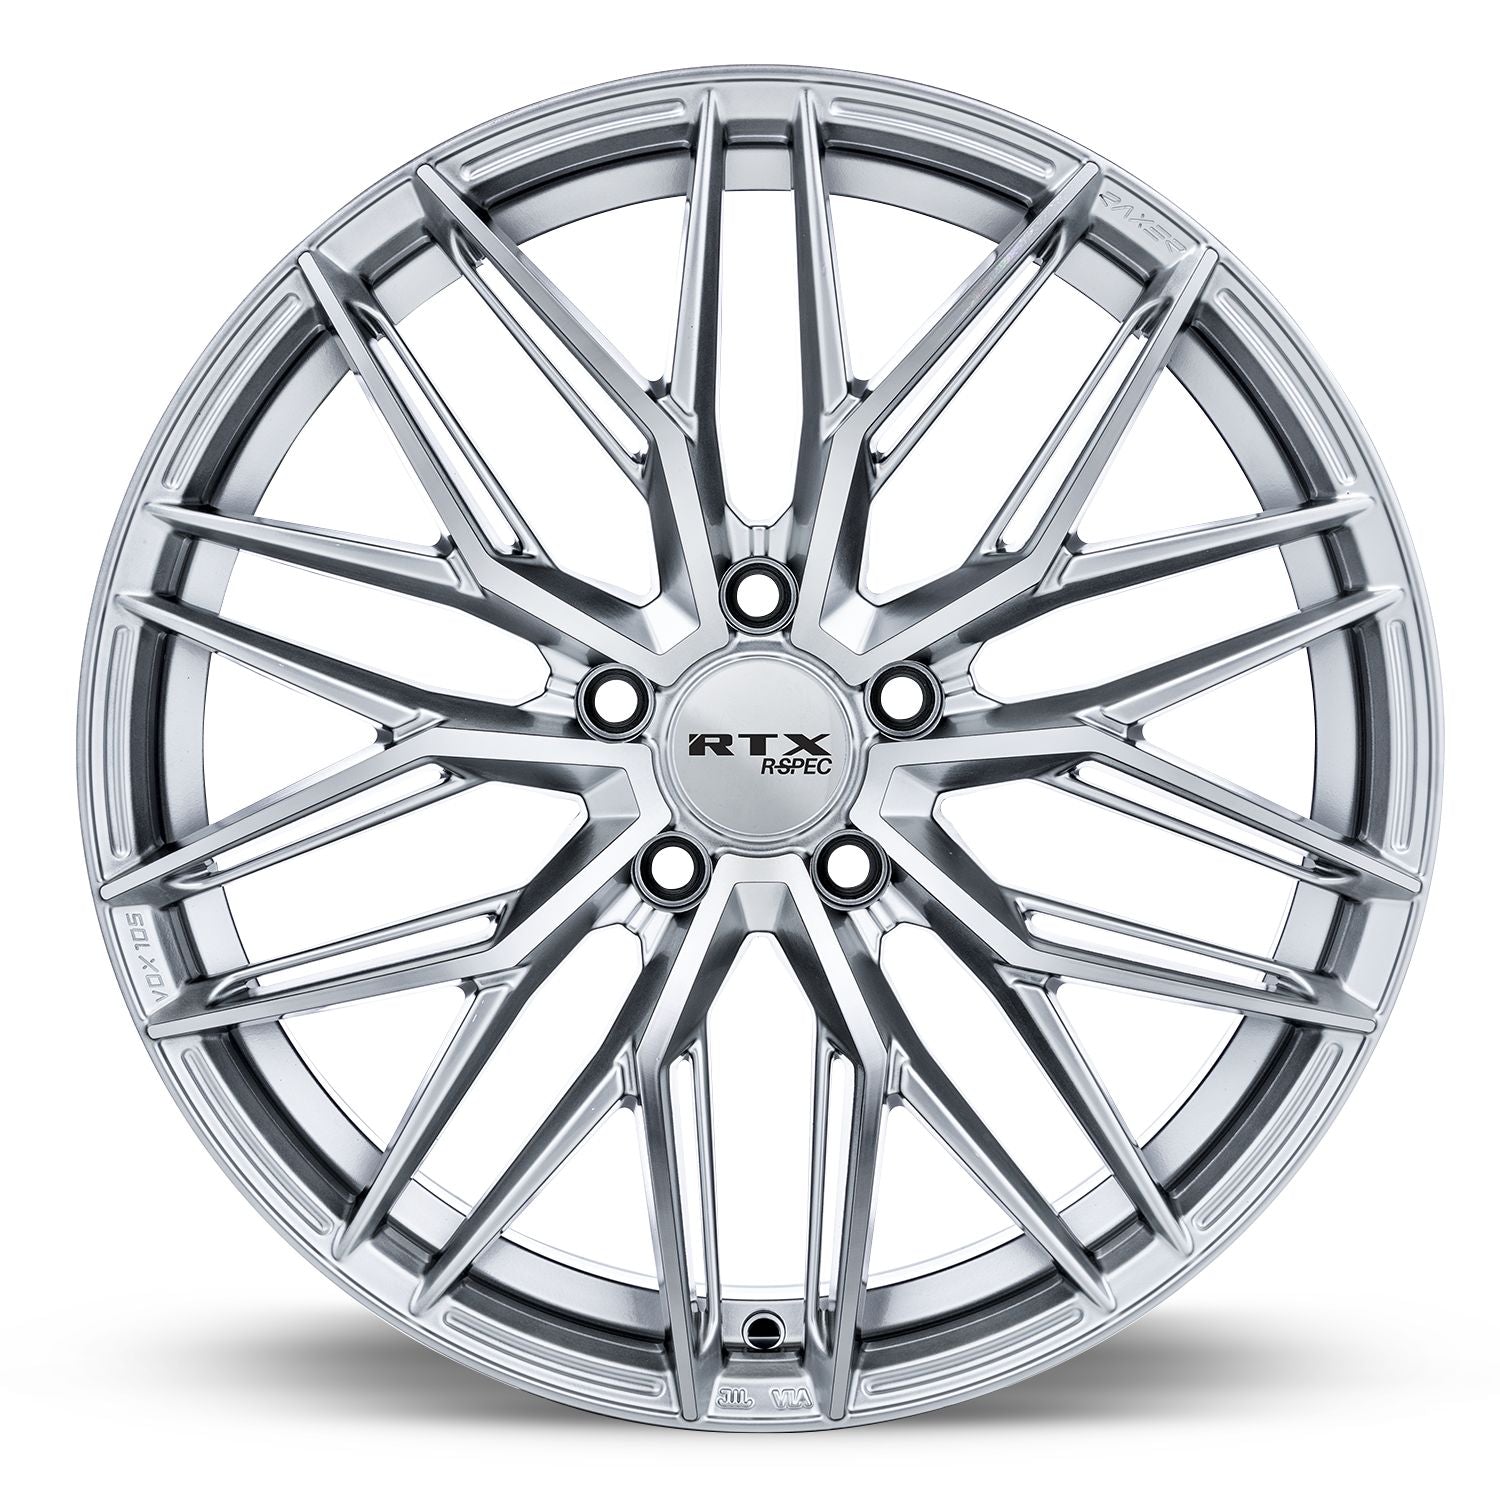 SW20 • Silver with Machined Face • 18x8.5 5x114.3 ET45 CB73.1